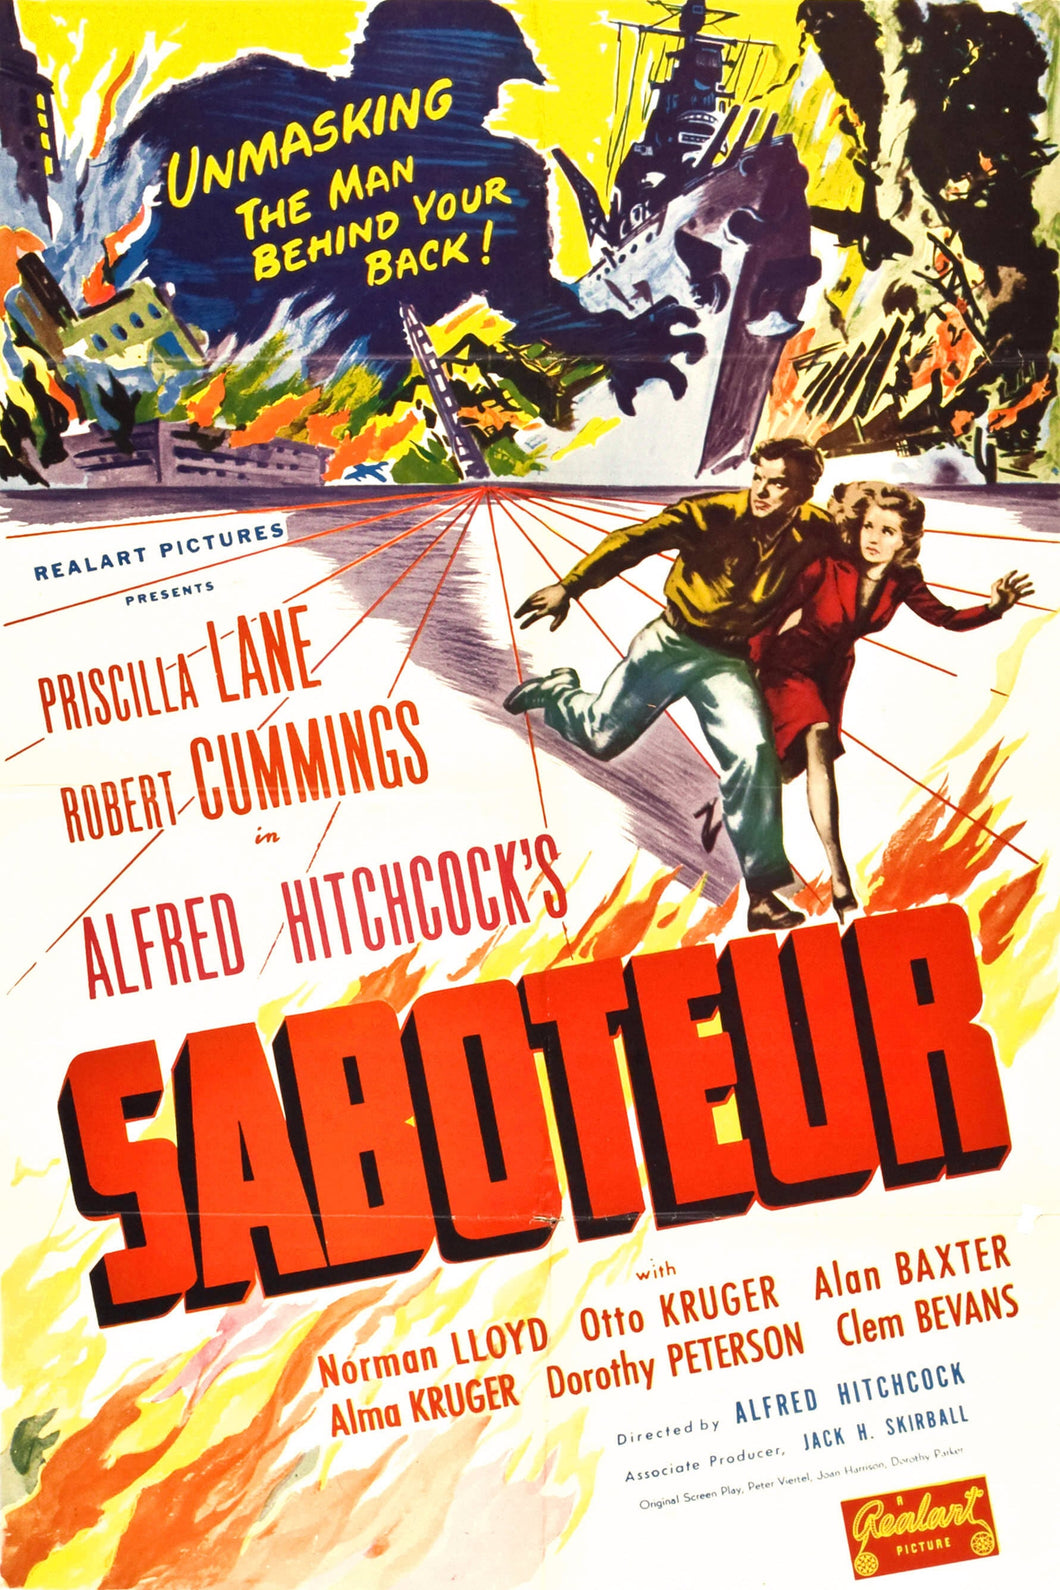 Saboteur (1942) v1 Movie Poster High Quality Glossy Paper A1 A2 A3 A4 A3 Framed or Unframed!!